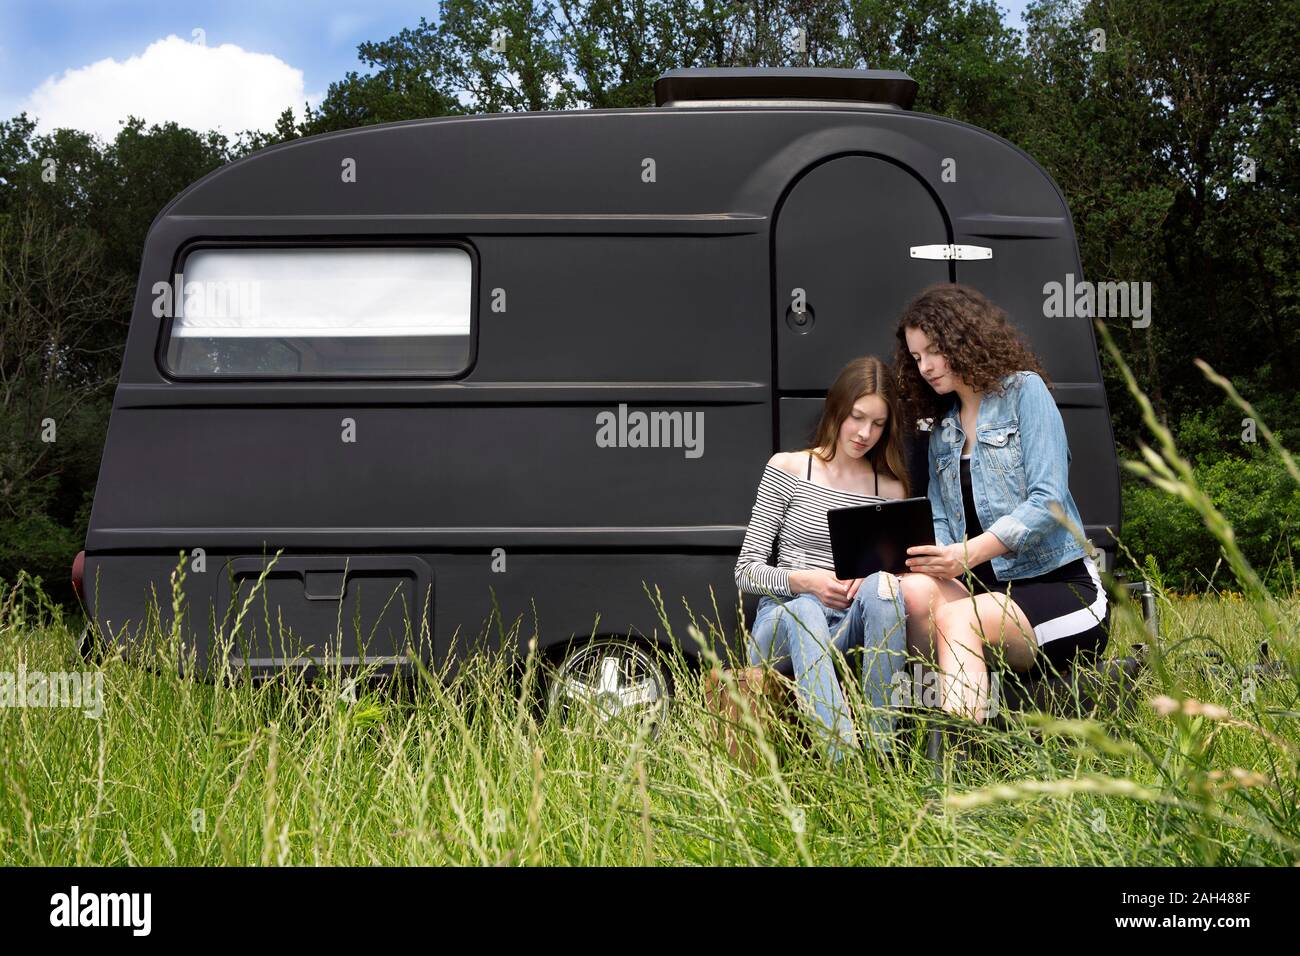 Two friends sitting on a meadow in front of black caravan using digital tablet Stock Photo